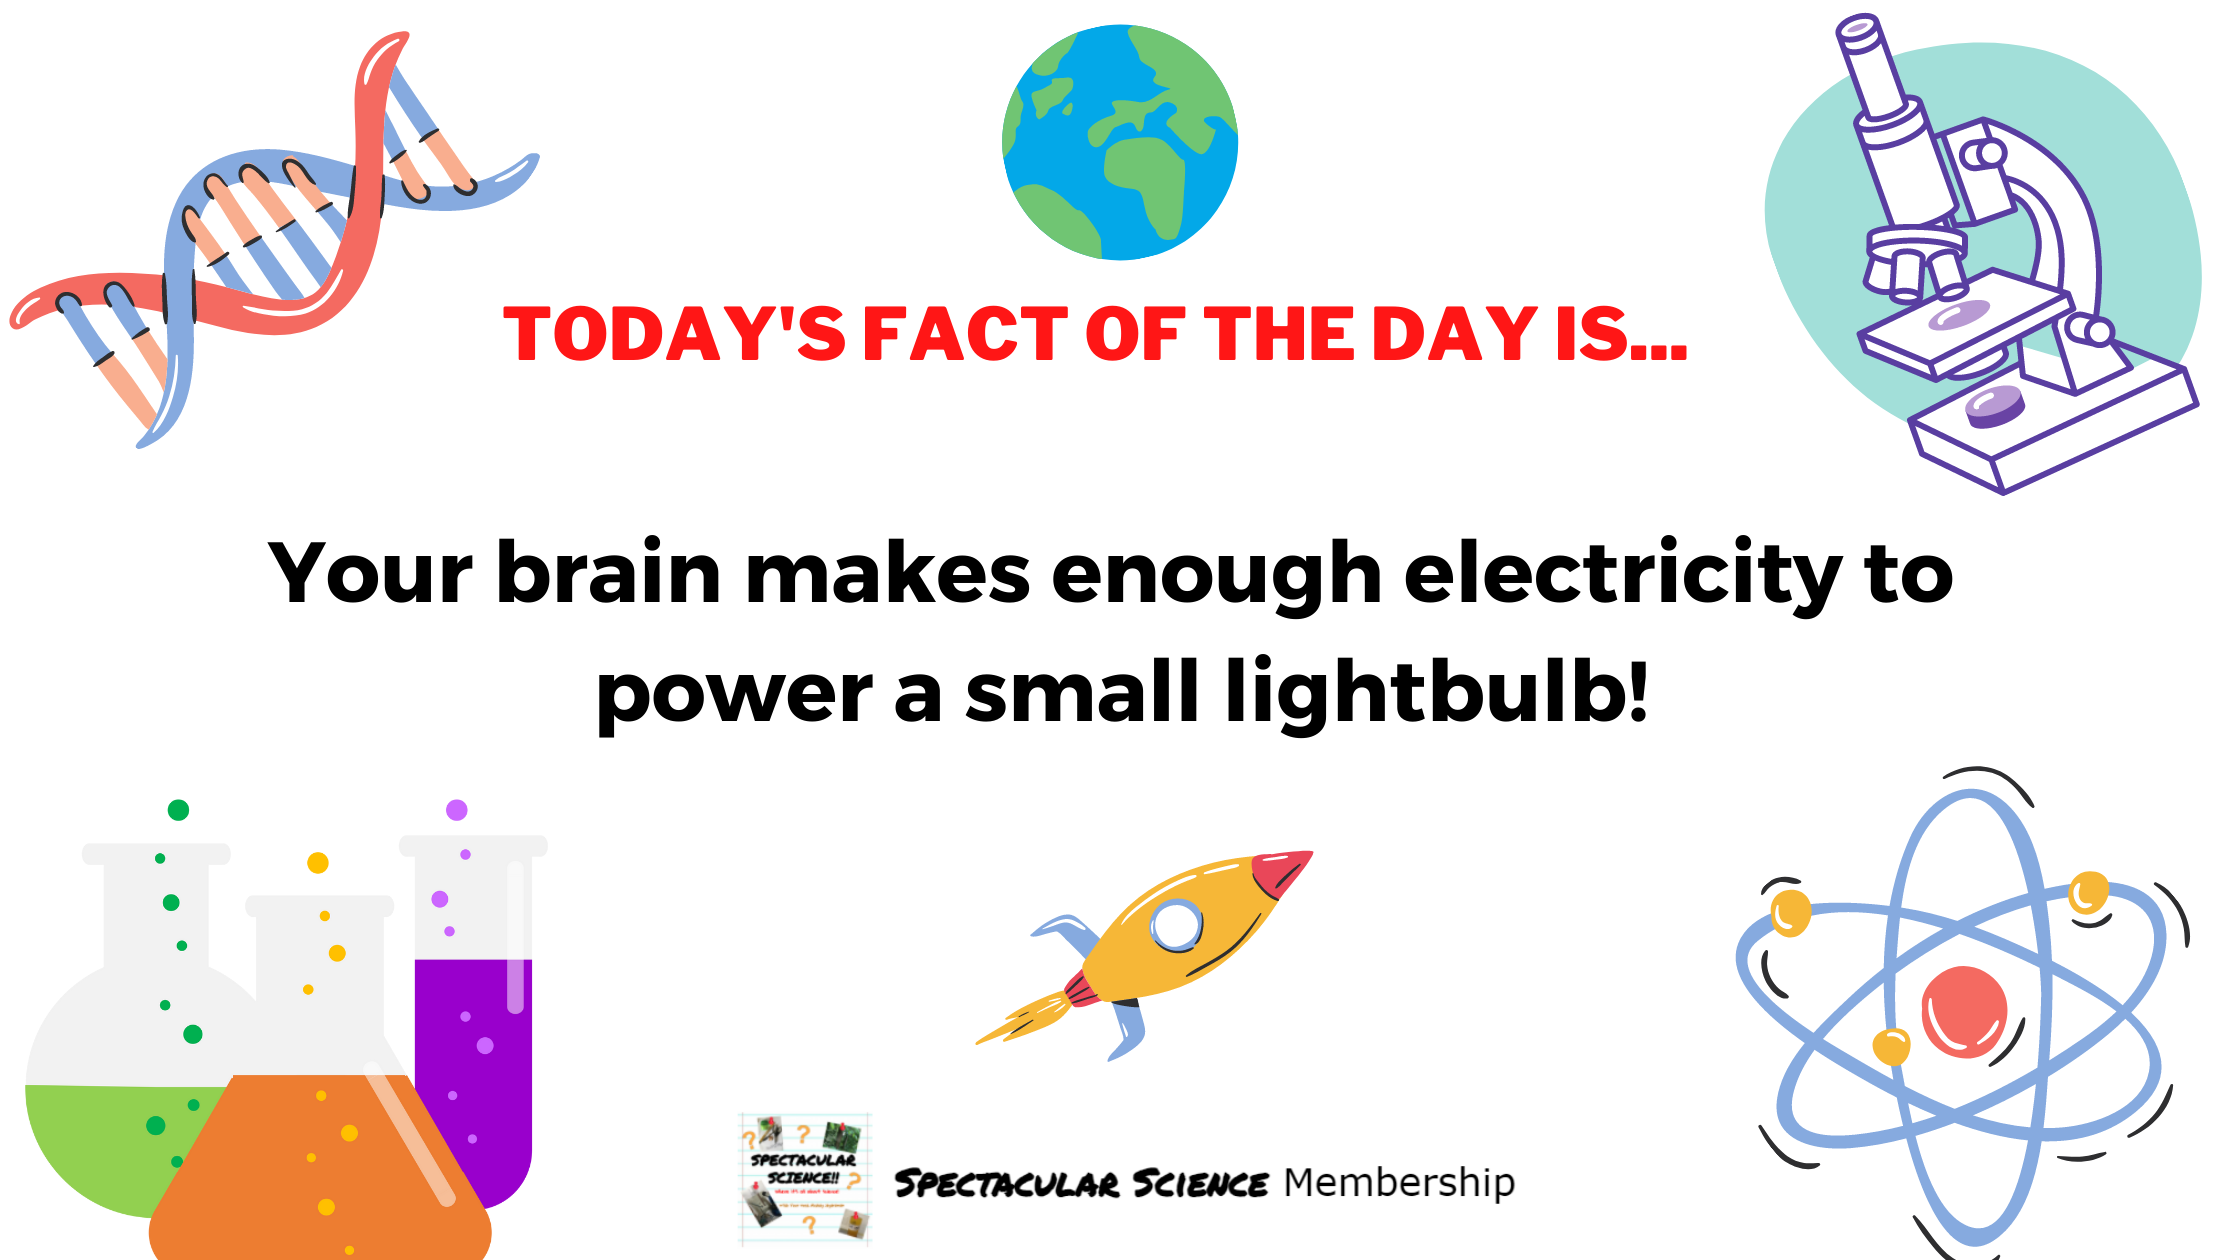 Fact of the Day Image Dec. 6th